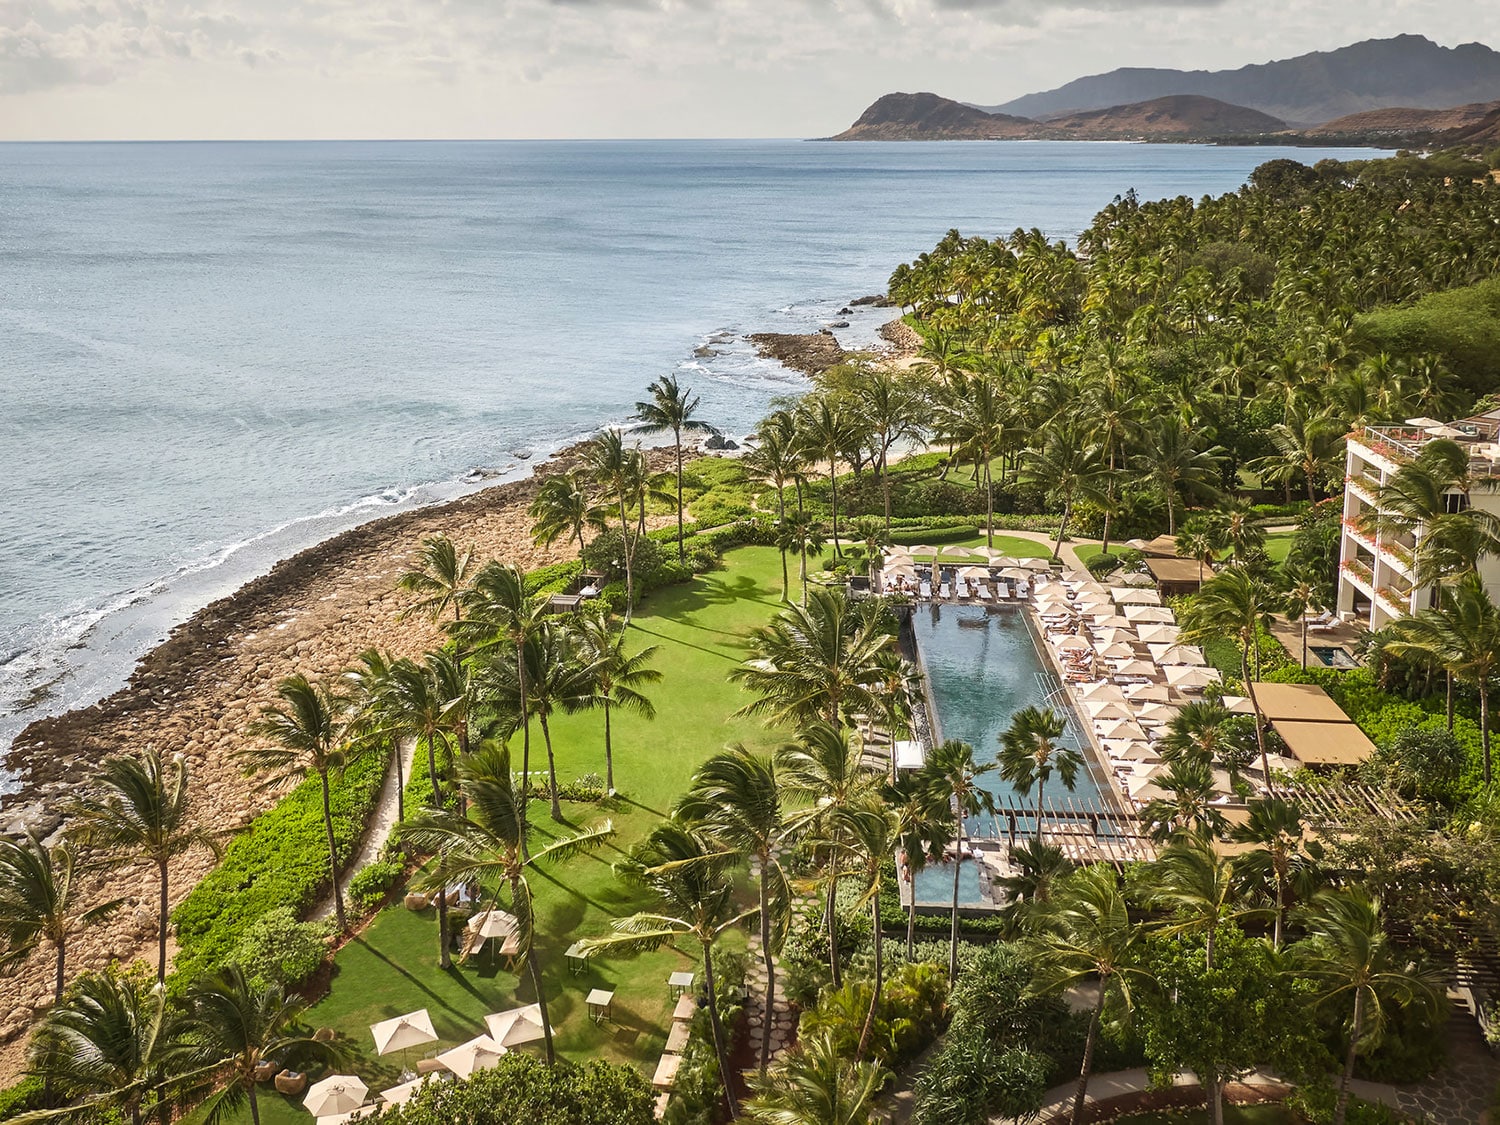 The Four Seasons Resort at Ko Olina features a variety of luxurious amenities creatively blended with the surrounding natural beauty.